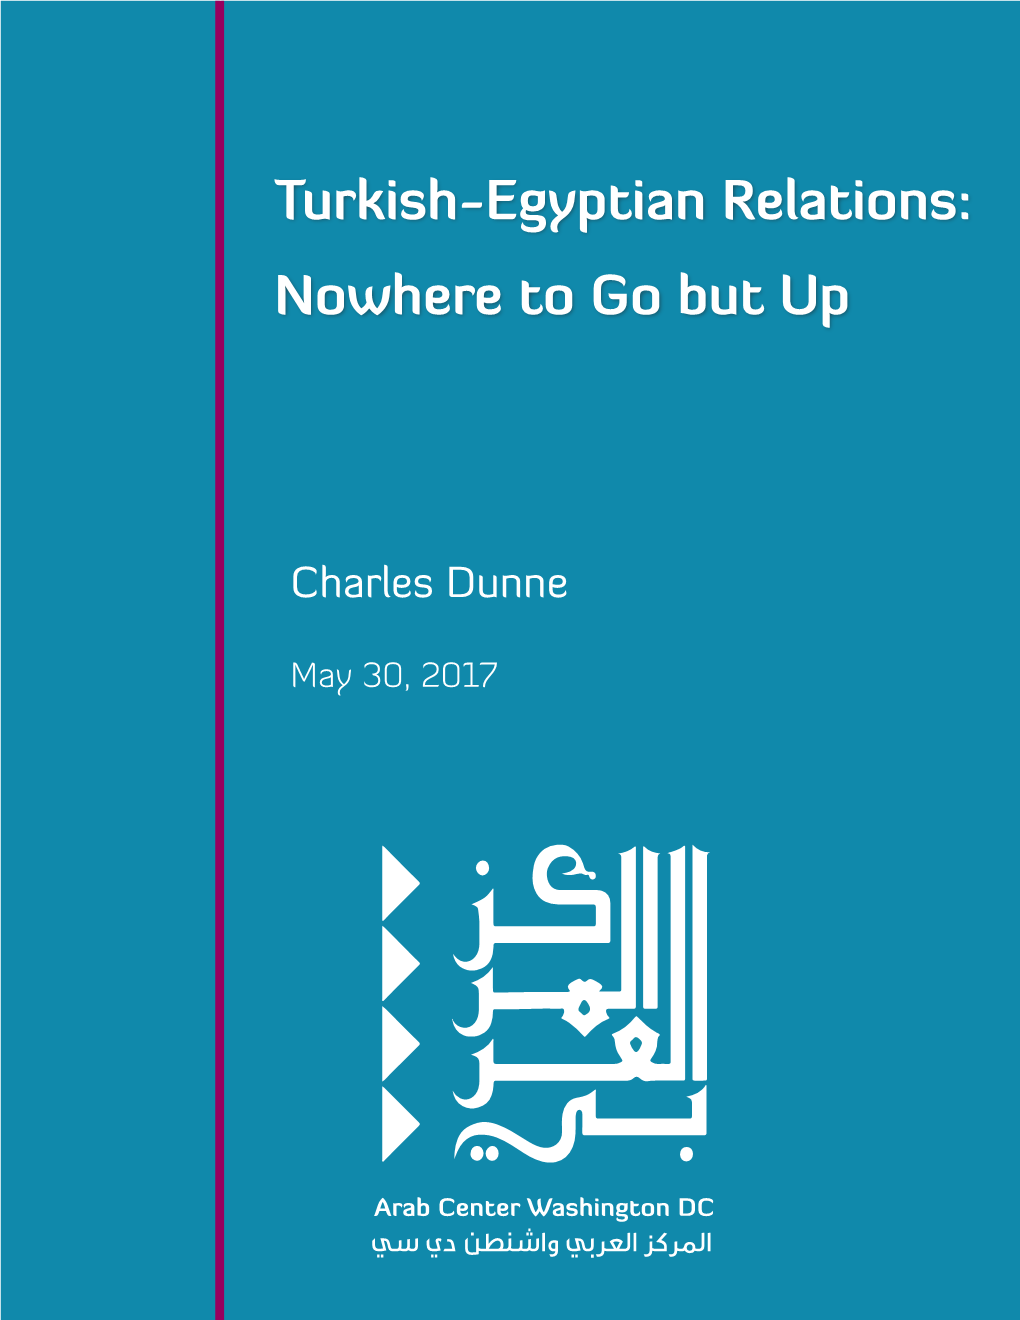 Turkish-Egyptian Relations: Nowhere to Go but Up